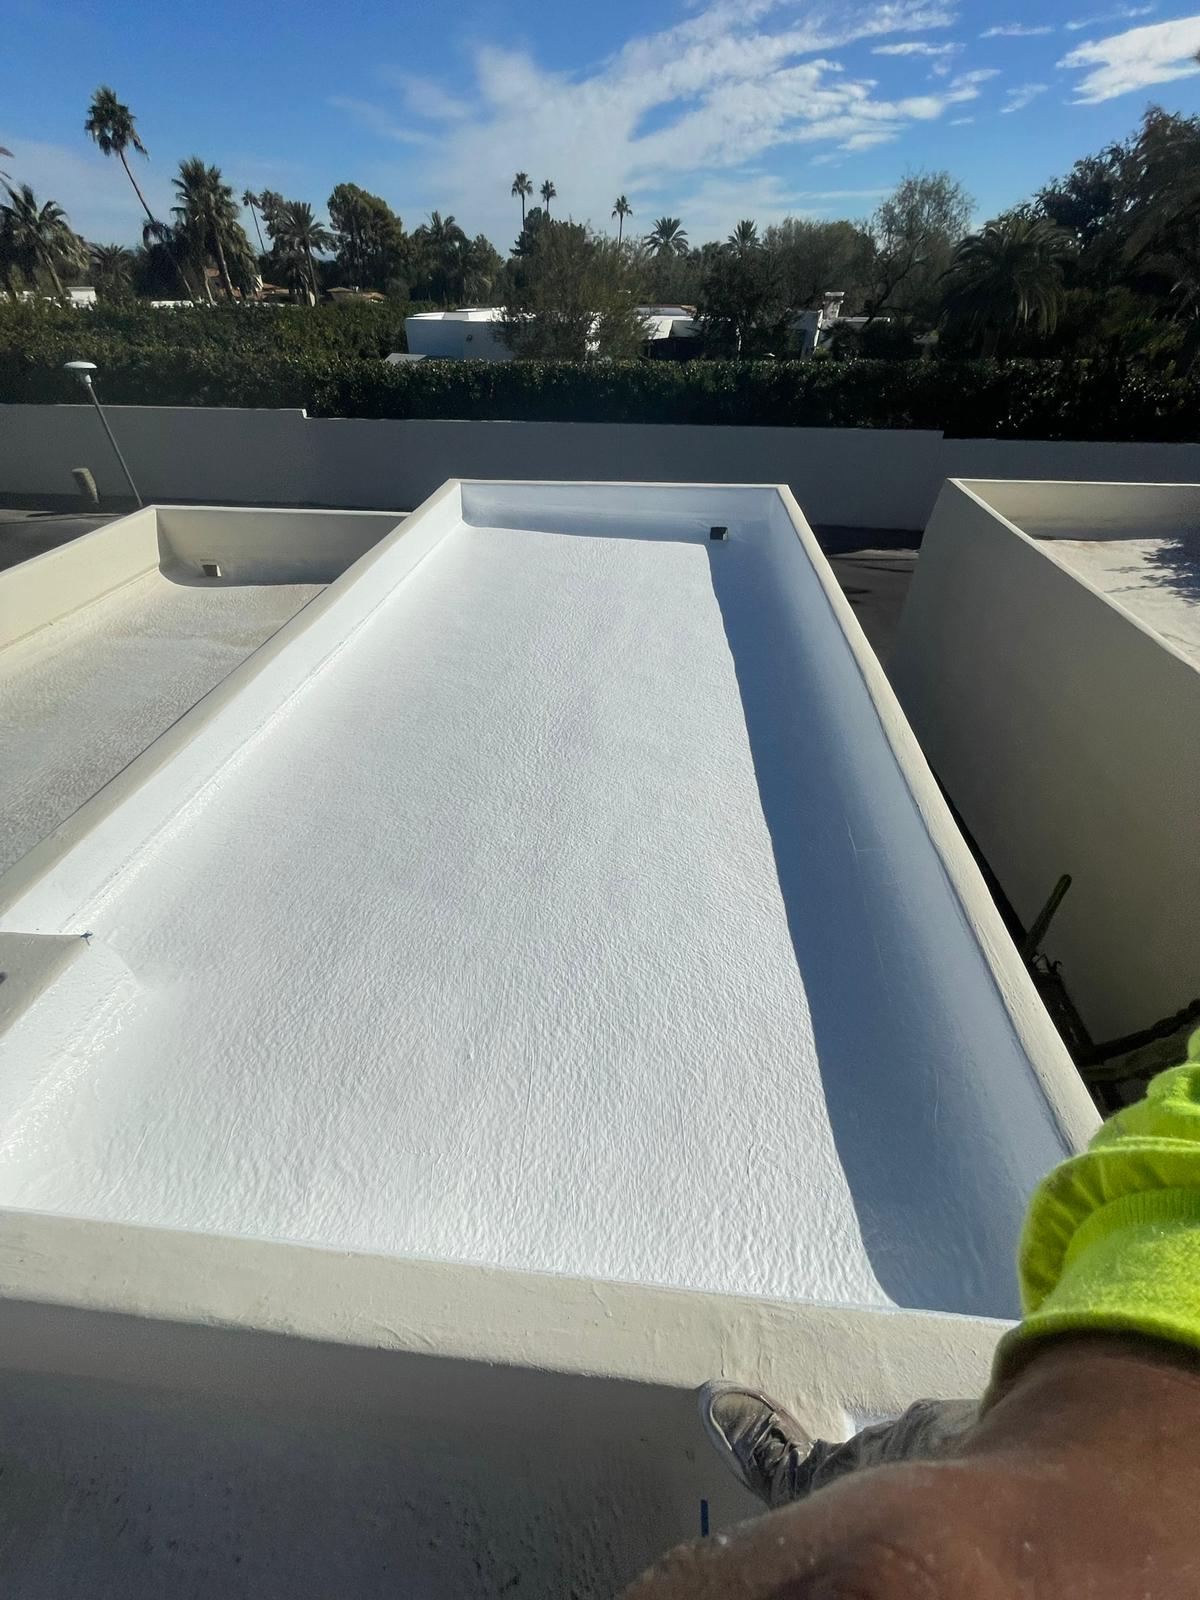 Worker oversees the finishing touches on a newly installed spray foam roof in Carefree, ensuring top-notch installation.